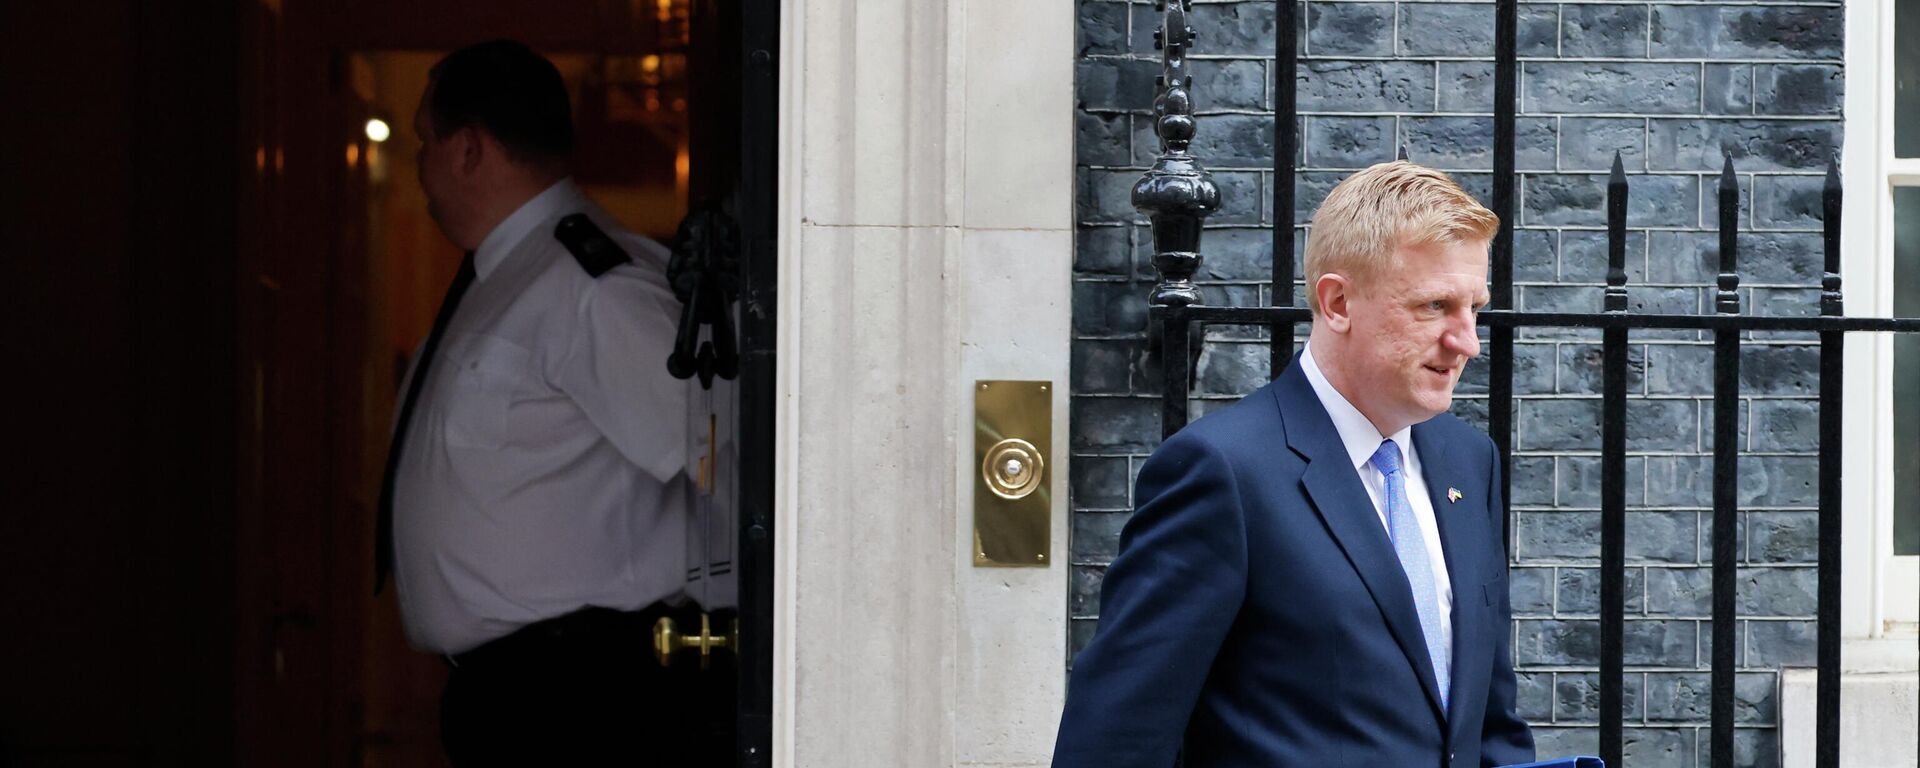 Britain's Conservative party chairman Oliver Dowden leaves after attending the weekly Cabinet meeting at 10 Downing Street, in London, on March 23, 2022. - Sputnik International, 1920, 24.06.2022